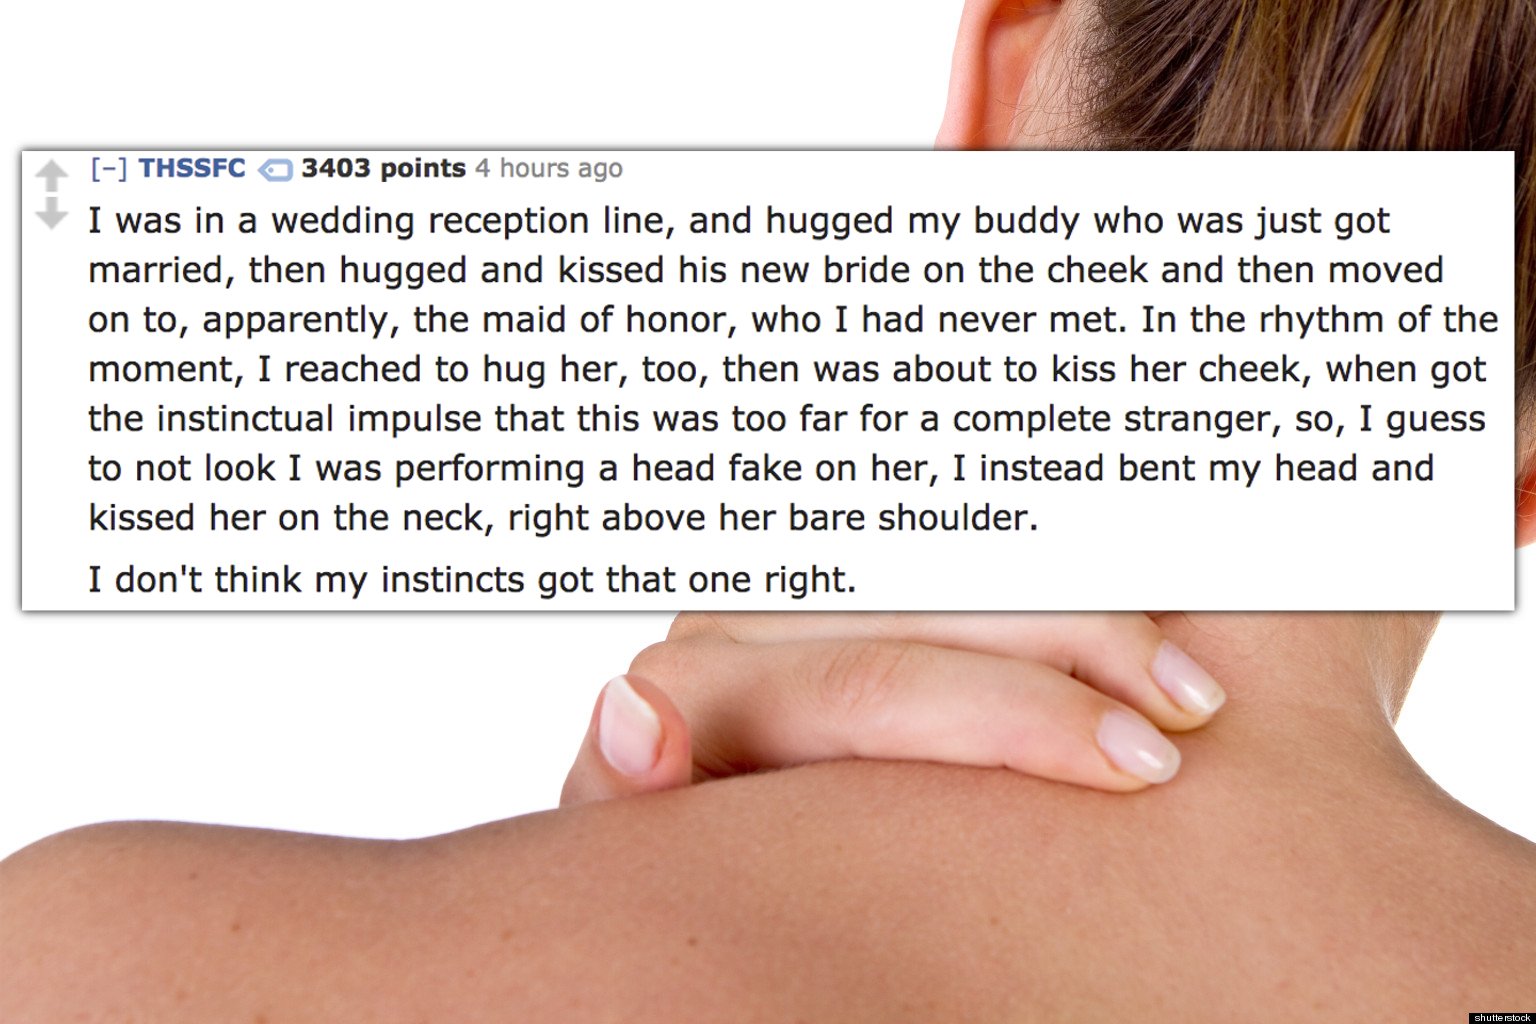 15 Accidental Physical Contact Stories That Are Super Awkward